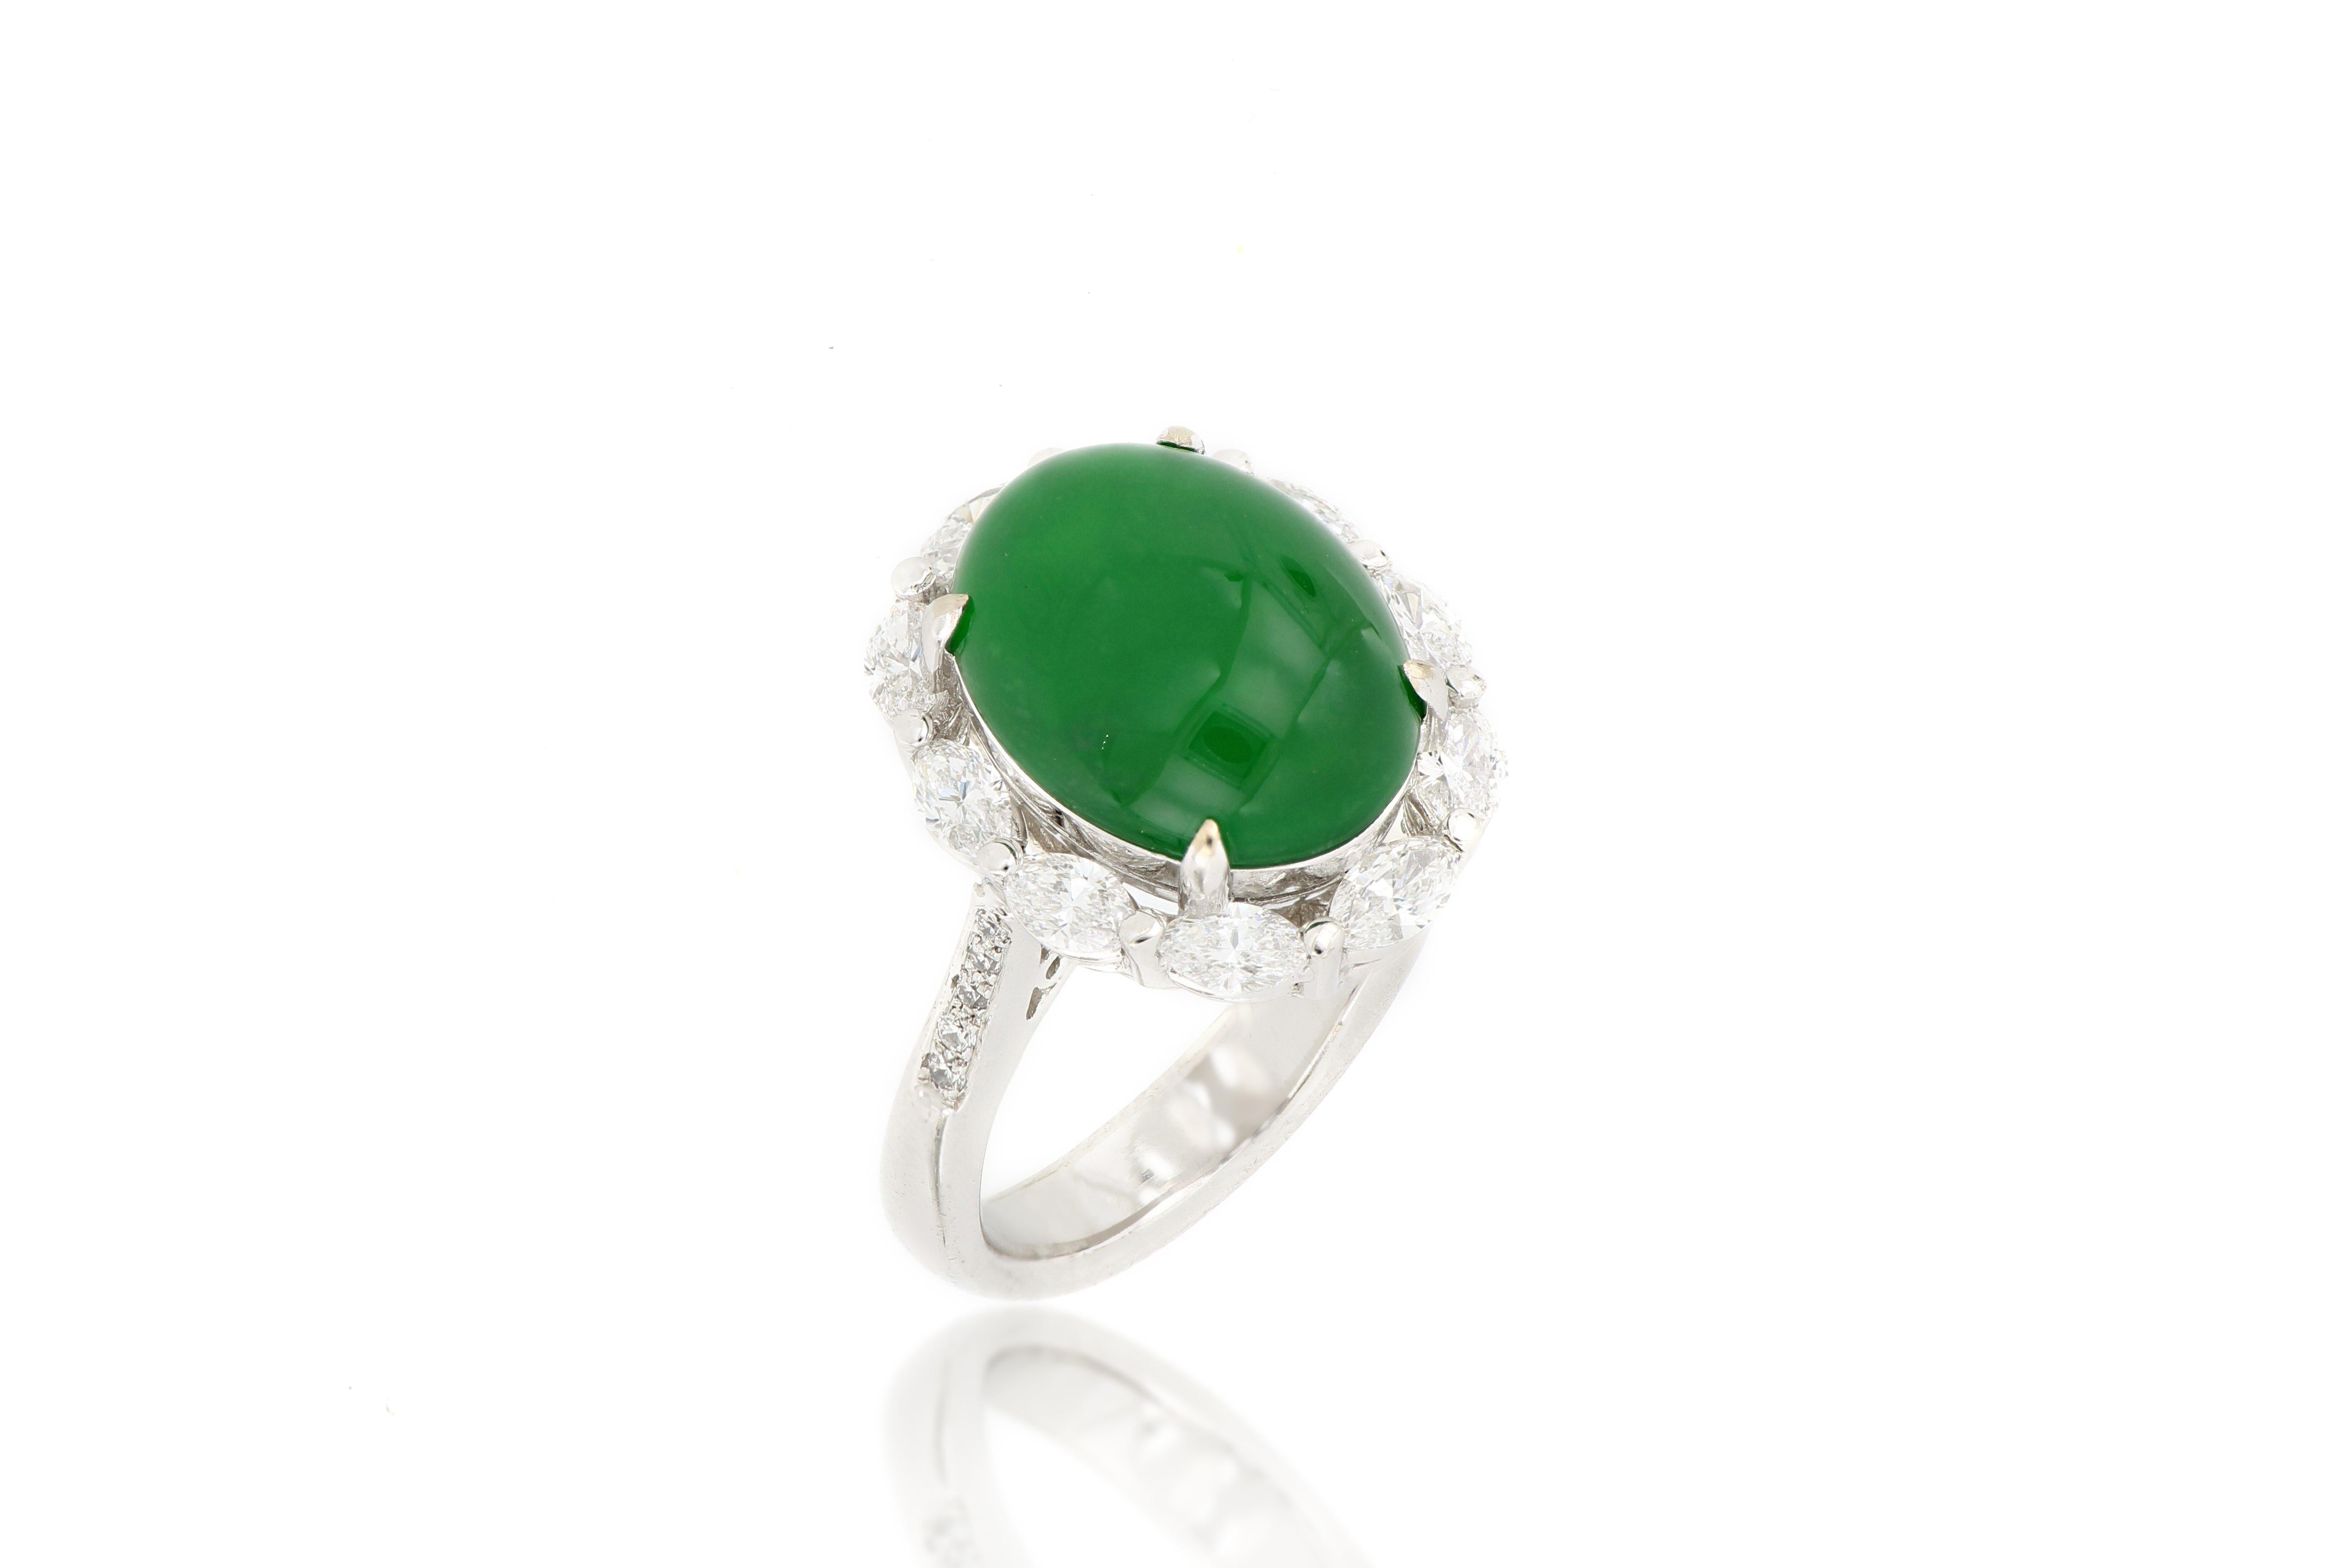 A magnificent piece of natural jadeite ring, centering a translucent oval jade cabochon of imperial bright green colour, is framed by  10 marquise-shaped diamonds and decorated by 10 round diamonds on the shank, with a total weight of 1.11